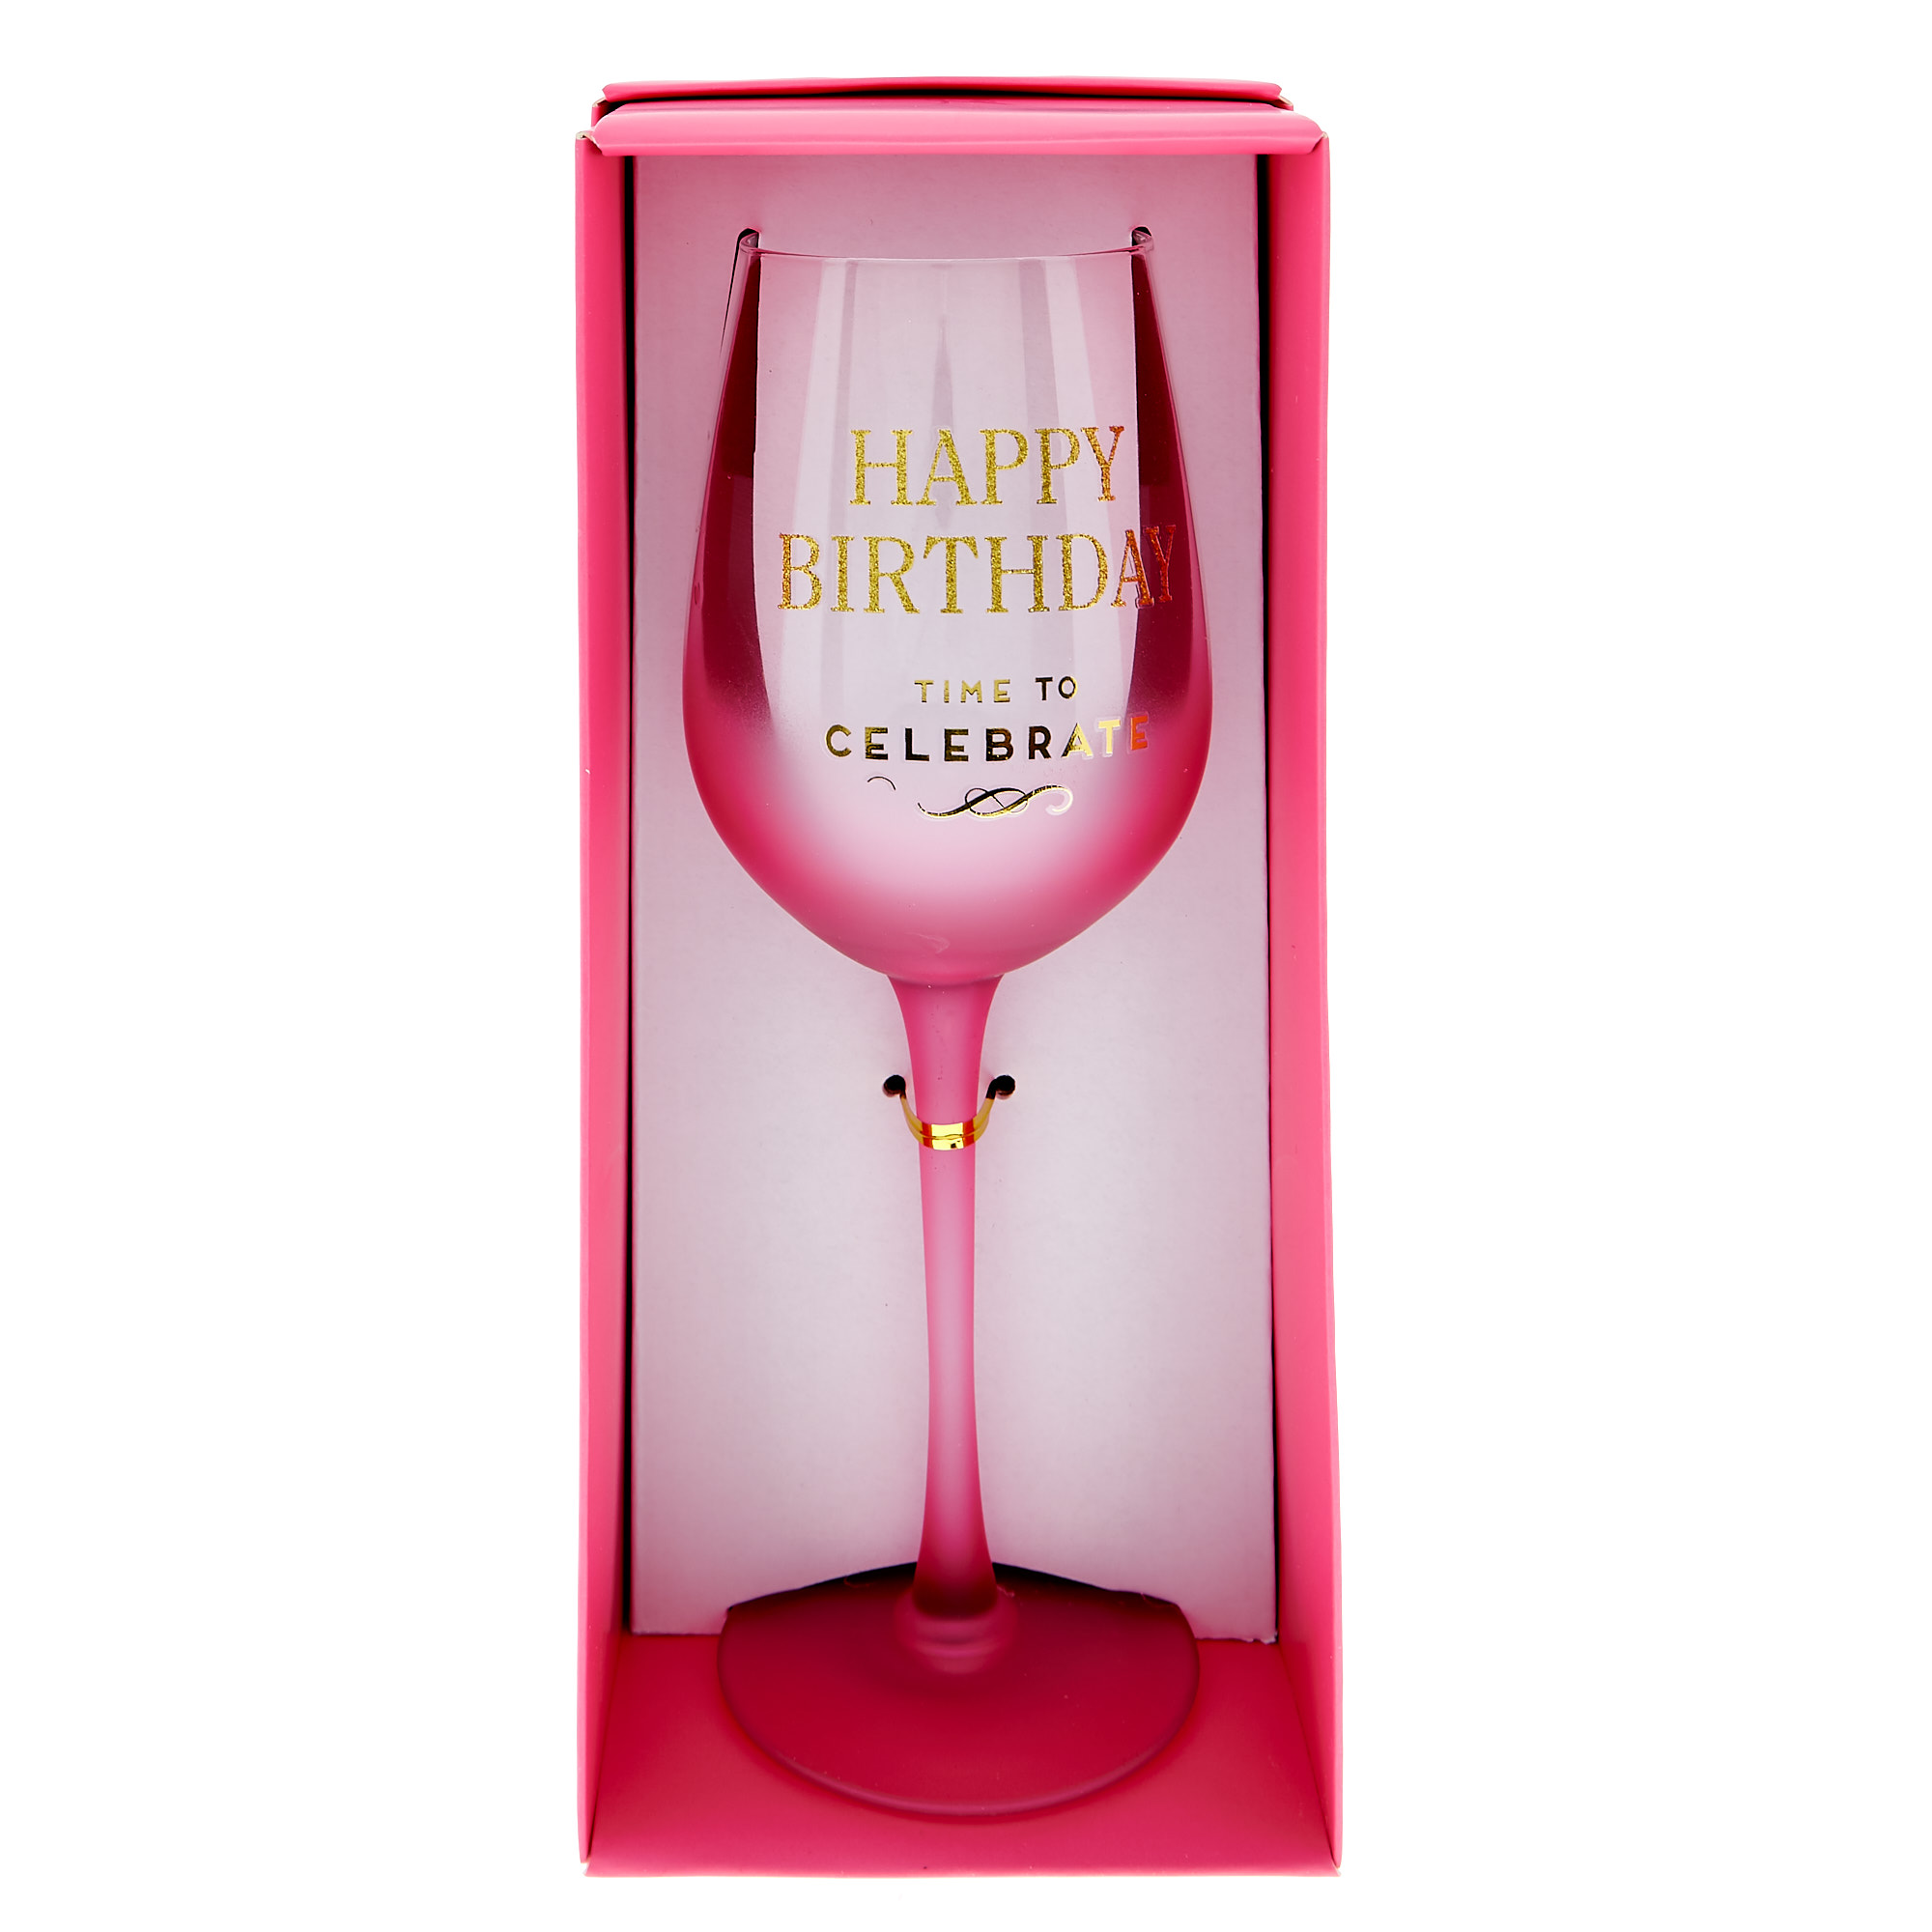 Buy Happy Birthday Wine Glass Time To Celebrate For Gbp 4 99 Card